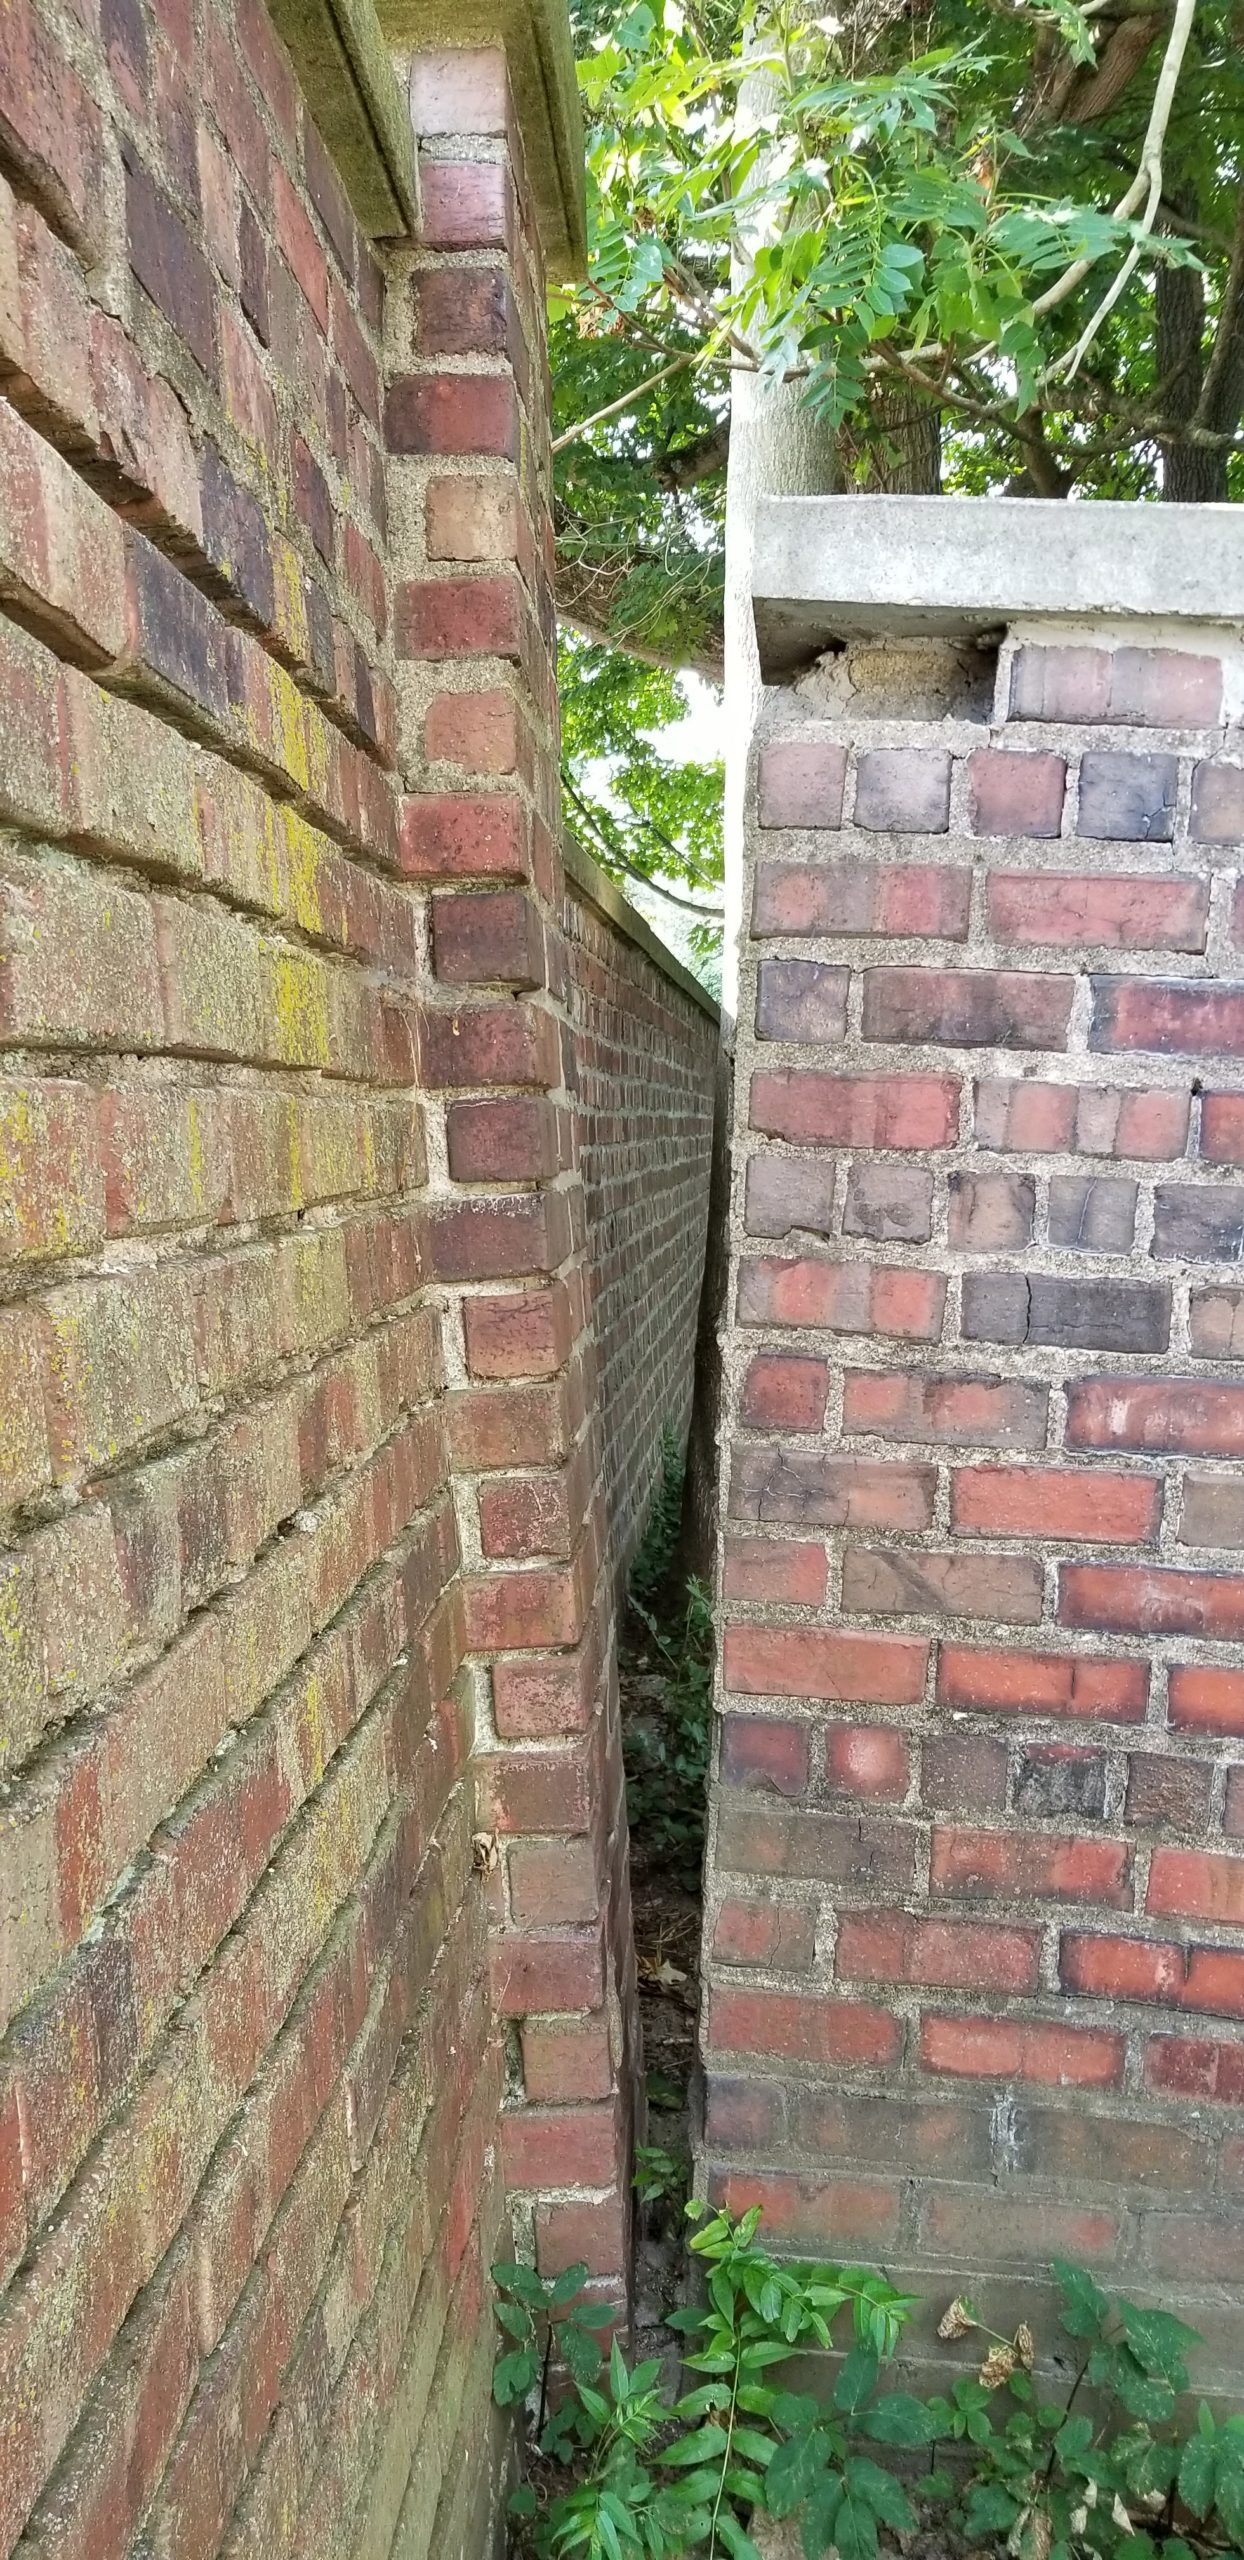 Wall restoration needed: Two brick walls meet; one is leaning significantly.